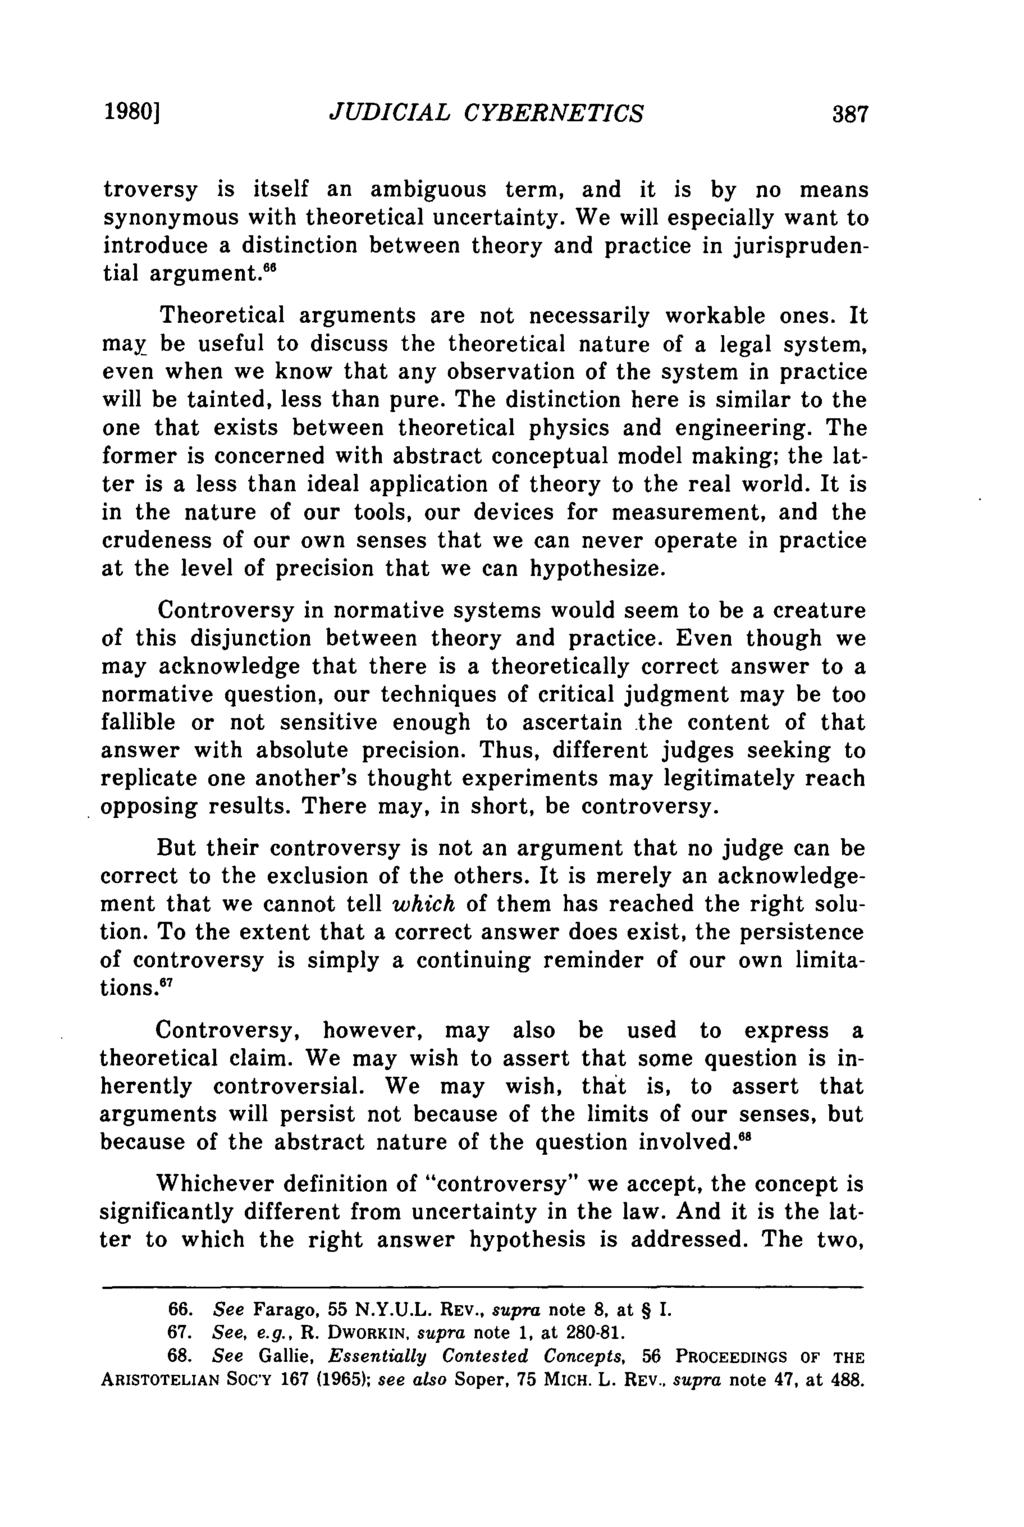 1980] Farago: Judicial Cybernetics: The Effects of Self-Reference in Dworkin's JUDICIAL CYBERNETICS troversy is itself an ambiguous term, and it is by no means synonymous with theoretical uncertainty.